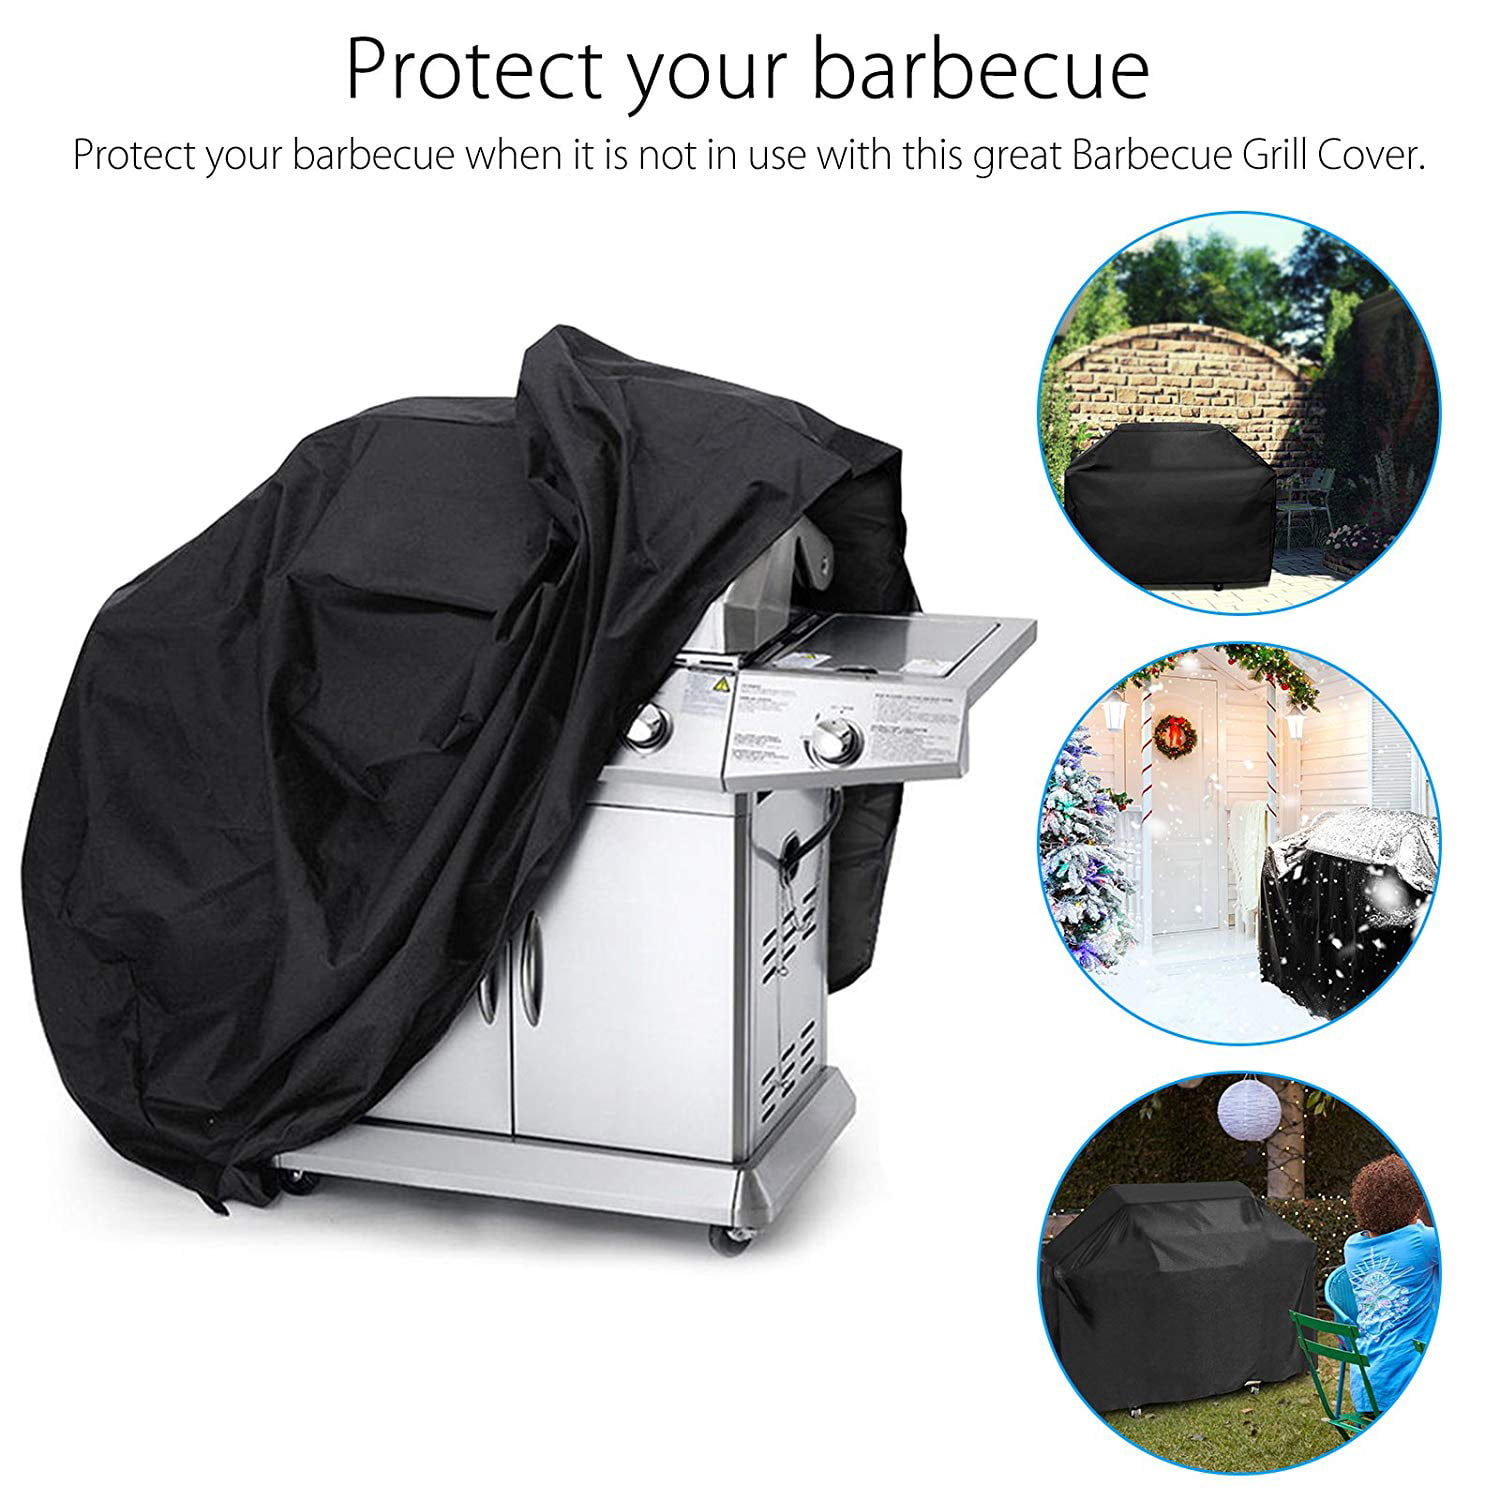 58 Inch 600D Heavy Duty Premium Gas Grill Cover UV & Fade & Rip Resistant Wenscha BBQ Grill Cover Black 58x24x48 Inches Fully Waterproof Fits Most Brands of Grill 